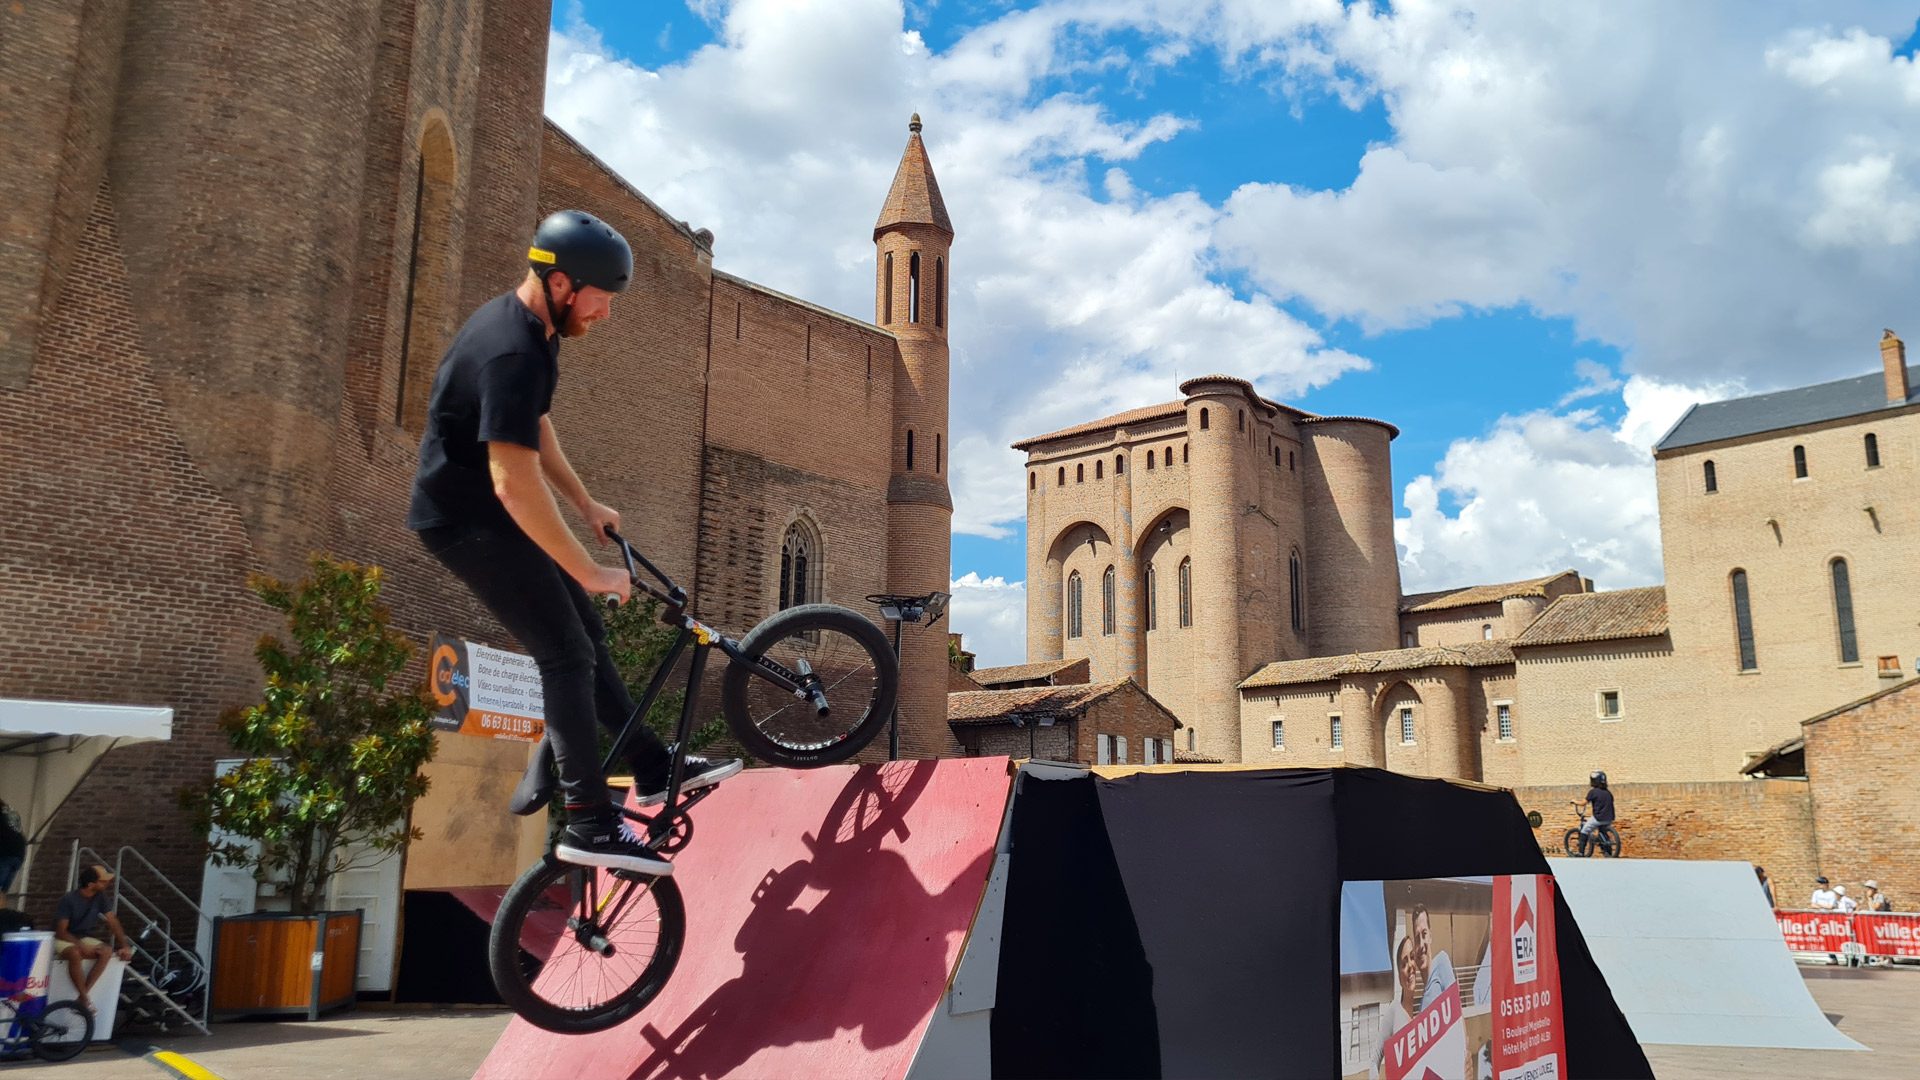 Albi a city on the move - Urban festival (end of August)